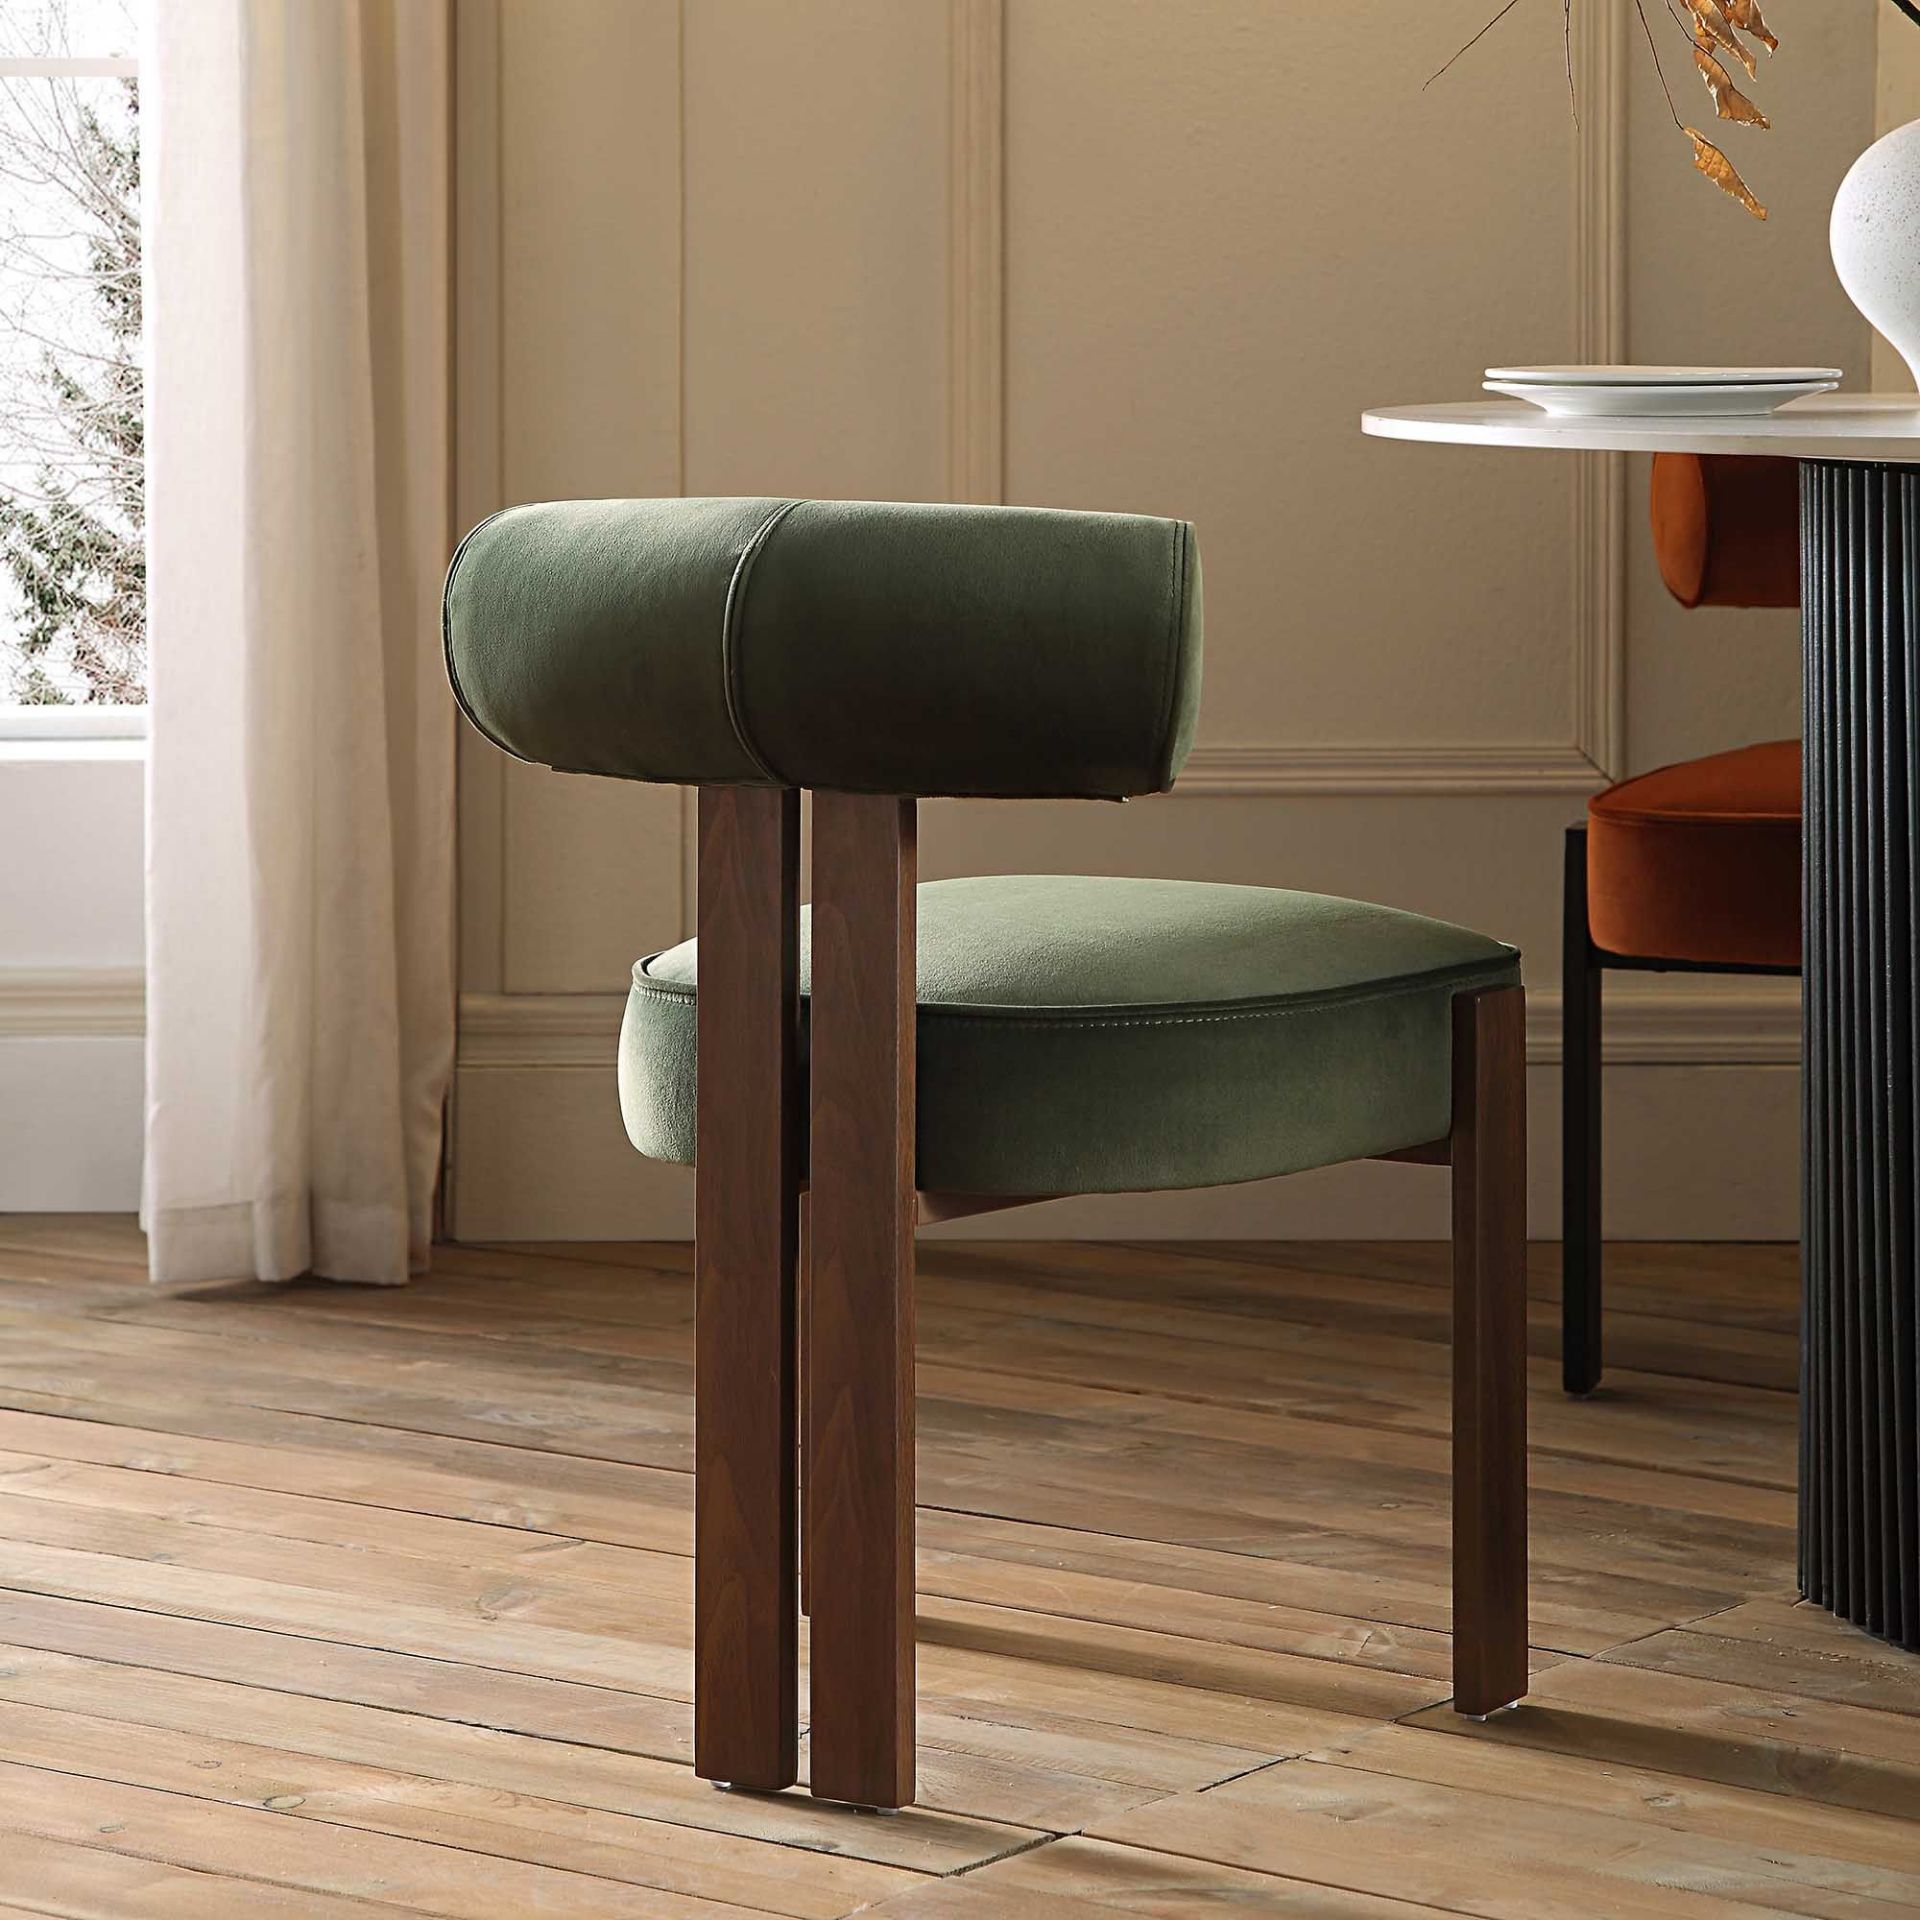 Ophelia Moss Green Velvet Dining Chair. - R19.5. RRP £209.99. Combining sumptuous moss green - Image 2 of 2